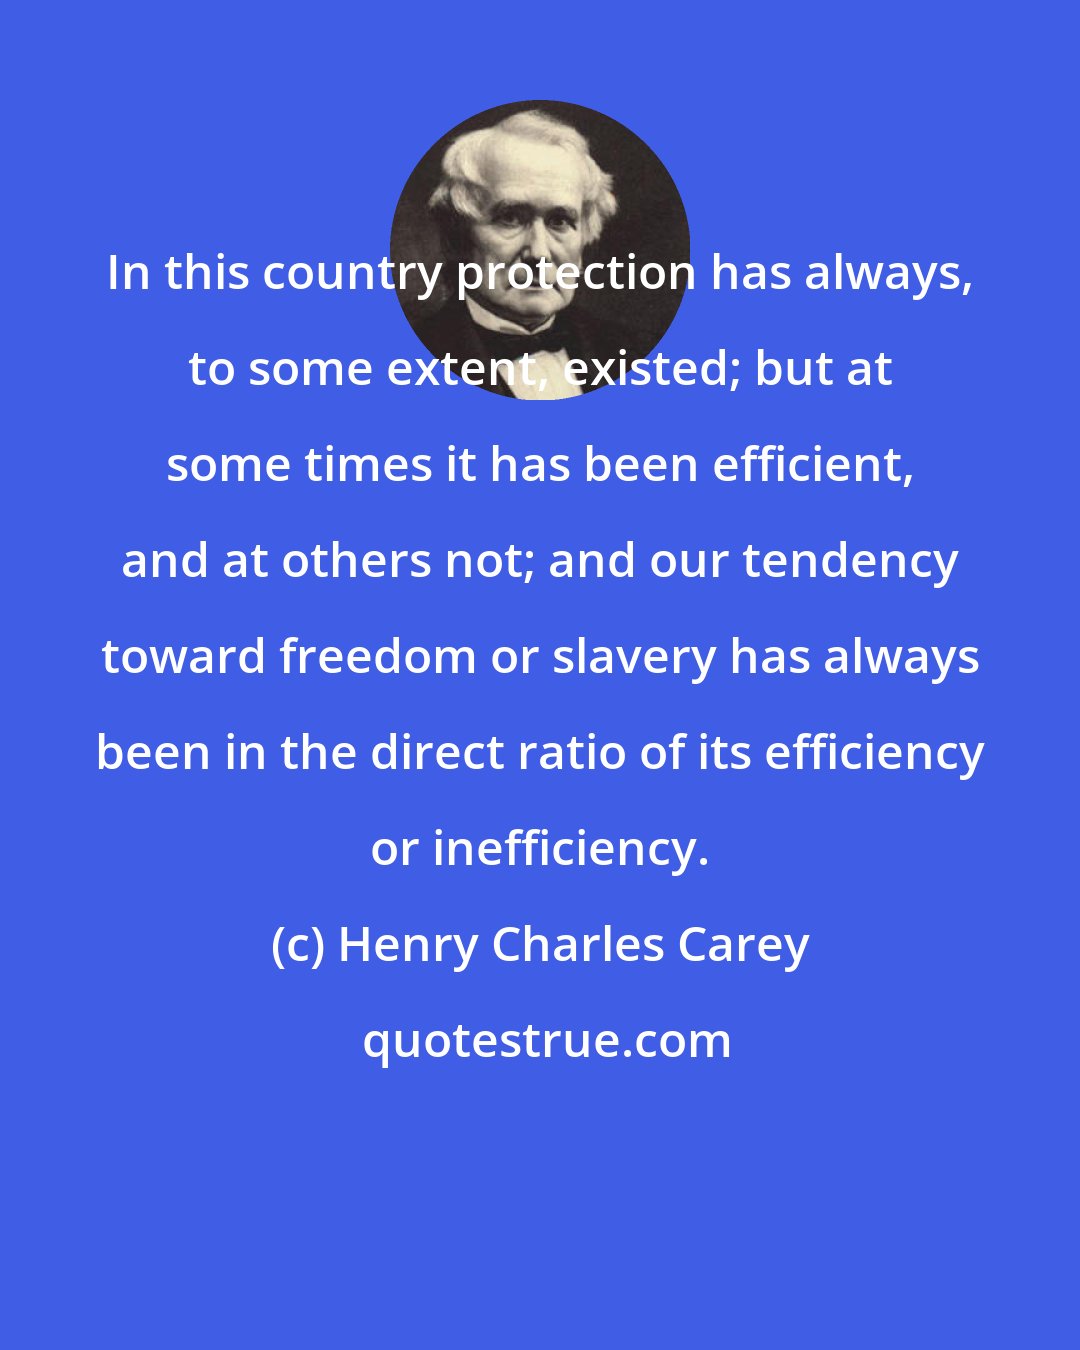 Henry Charles Carey: In this country protection has always, to some extent, existed; but at some times it has been efficient, and at others not; and our tendency toward freedom or slavery has always been in the direct ratio of its efficiency or inefficiency.